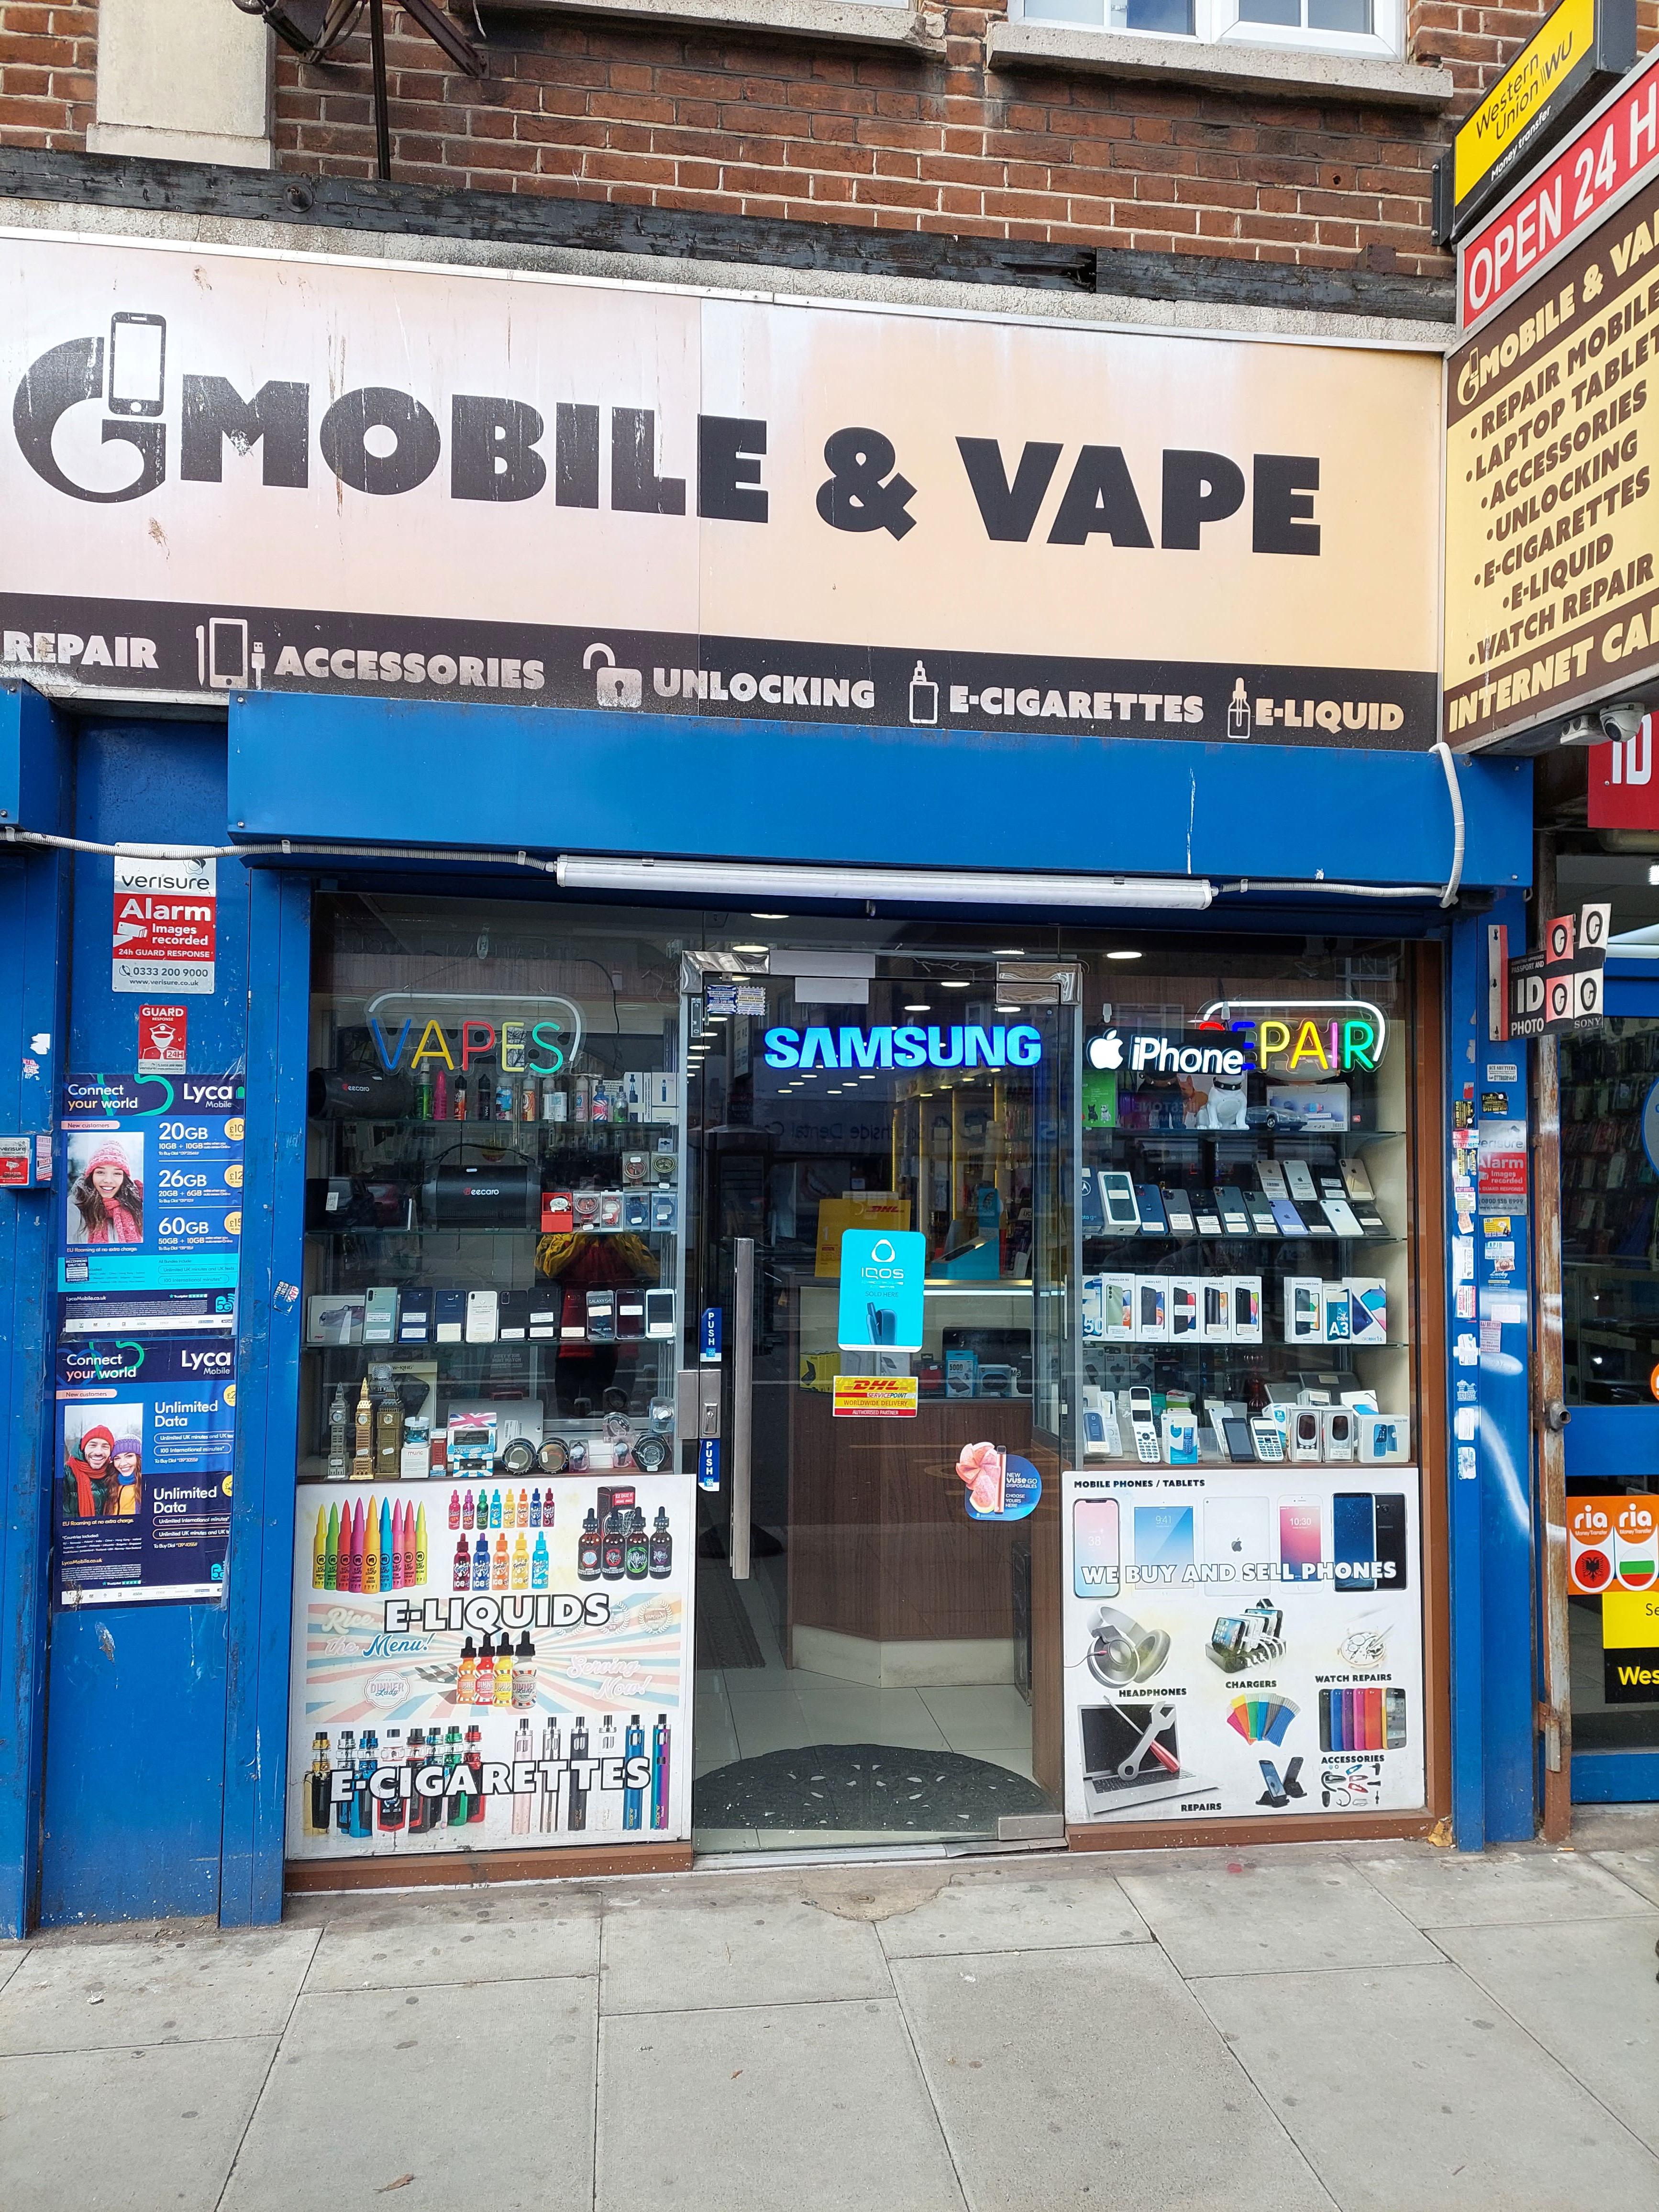 Images DHL Express Service Point (G Mobile & Vape - iPayOn)